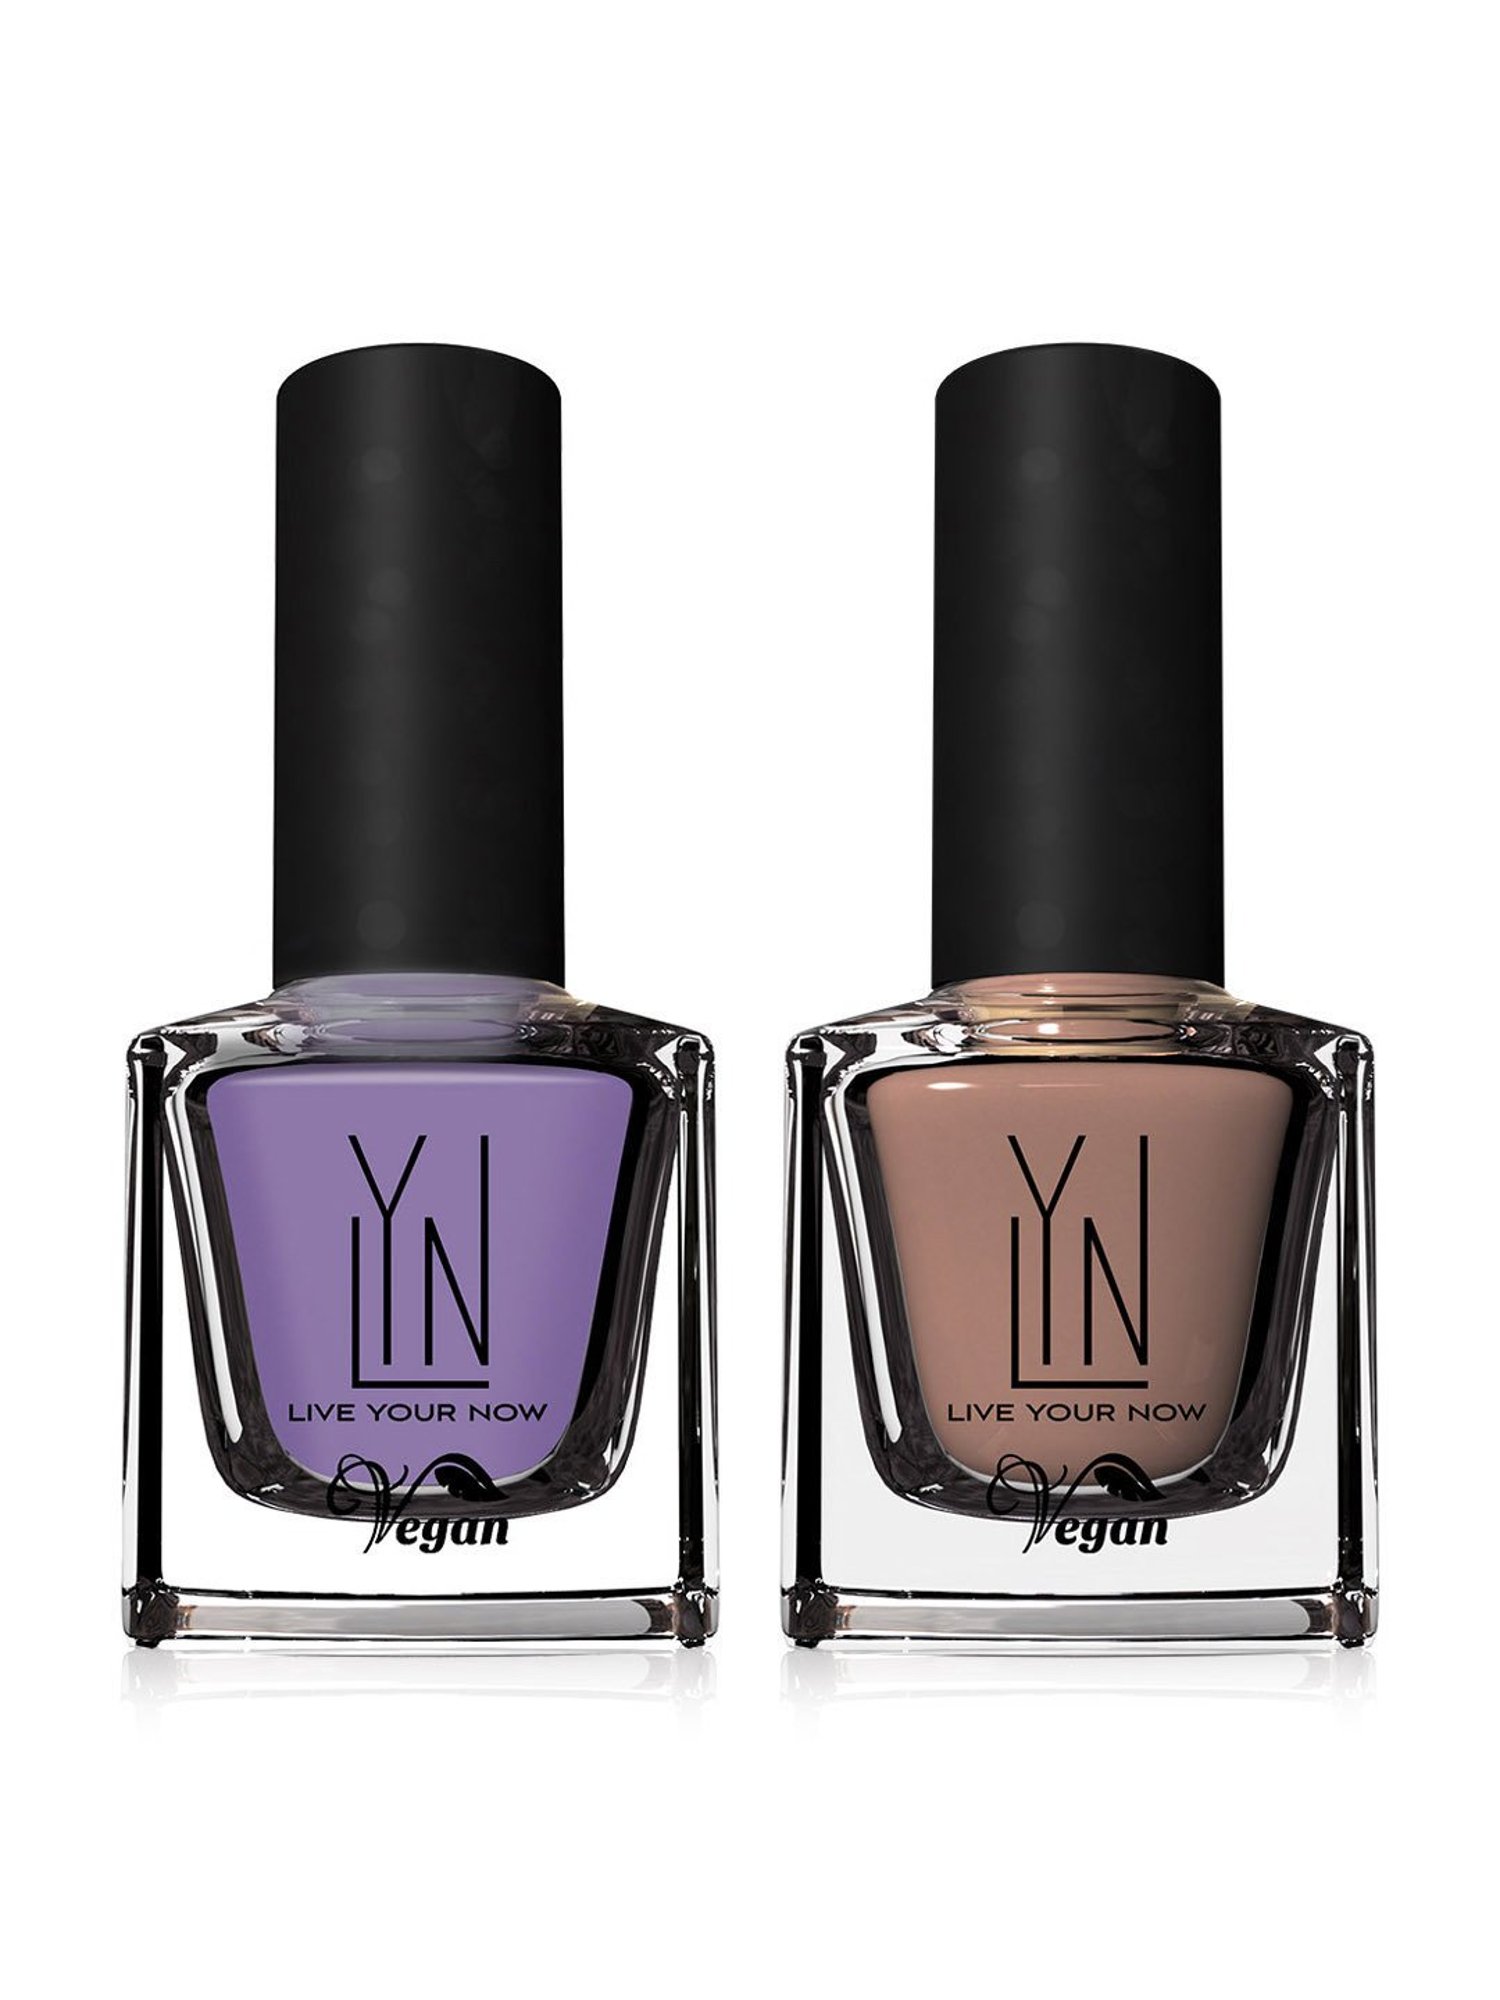 Buy Lyn Nail polish Birthday suit and Bunny nose Online at Low Prices in  India - Amazon.in